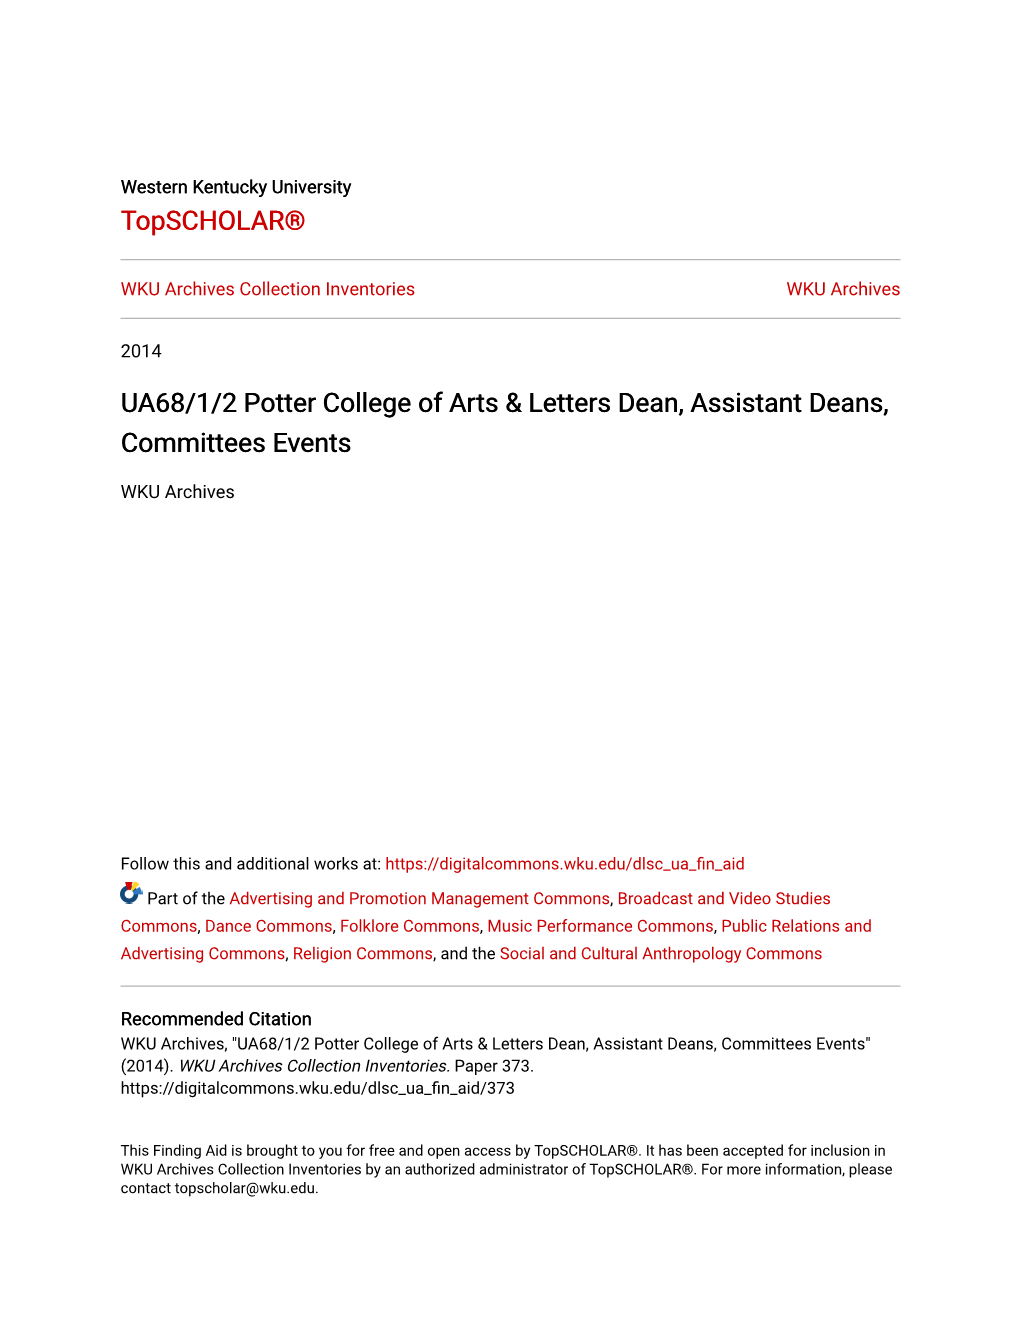 UA68/1/2 Potter College of Arts & Letters Dean, Assistant Deans, Committees Events